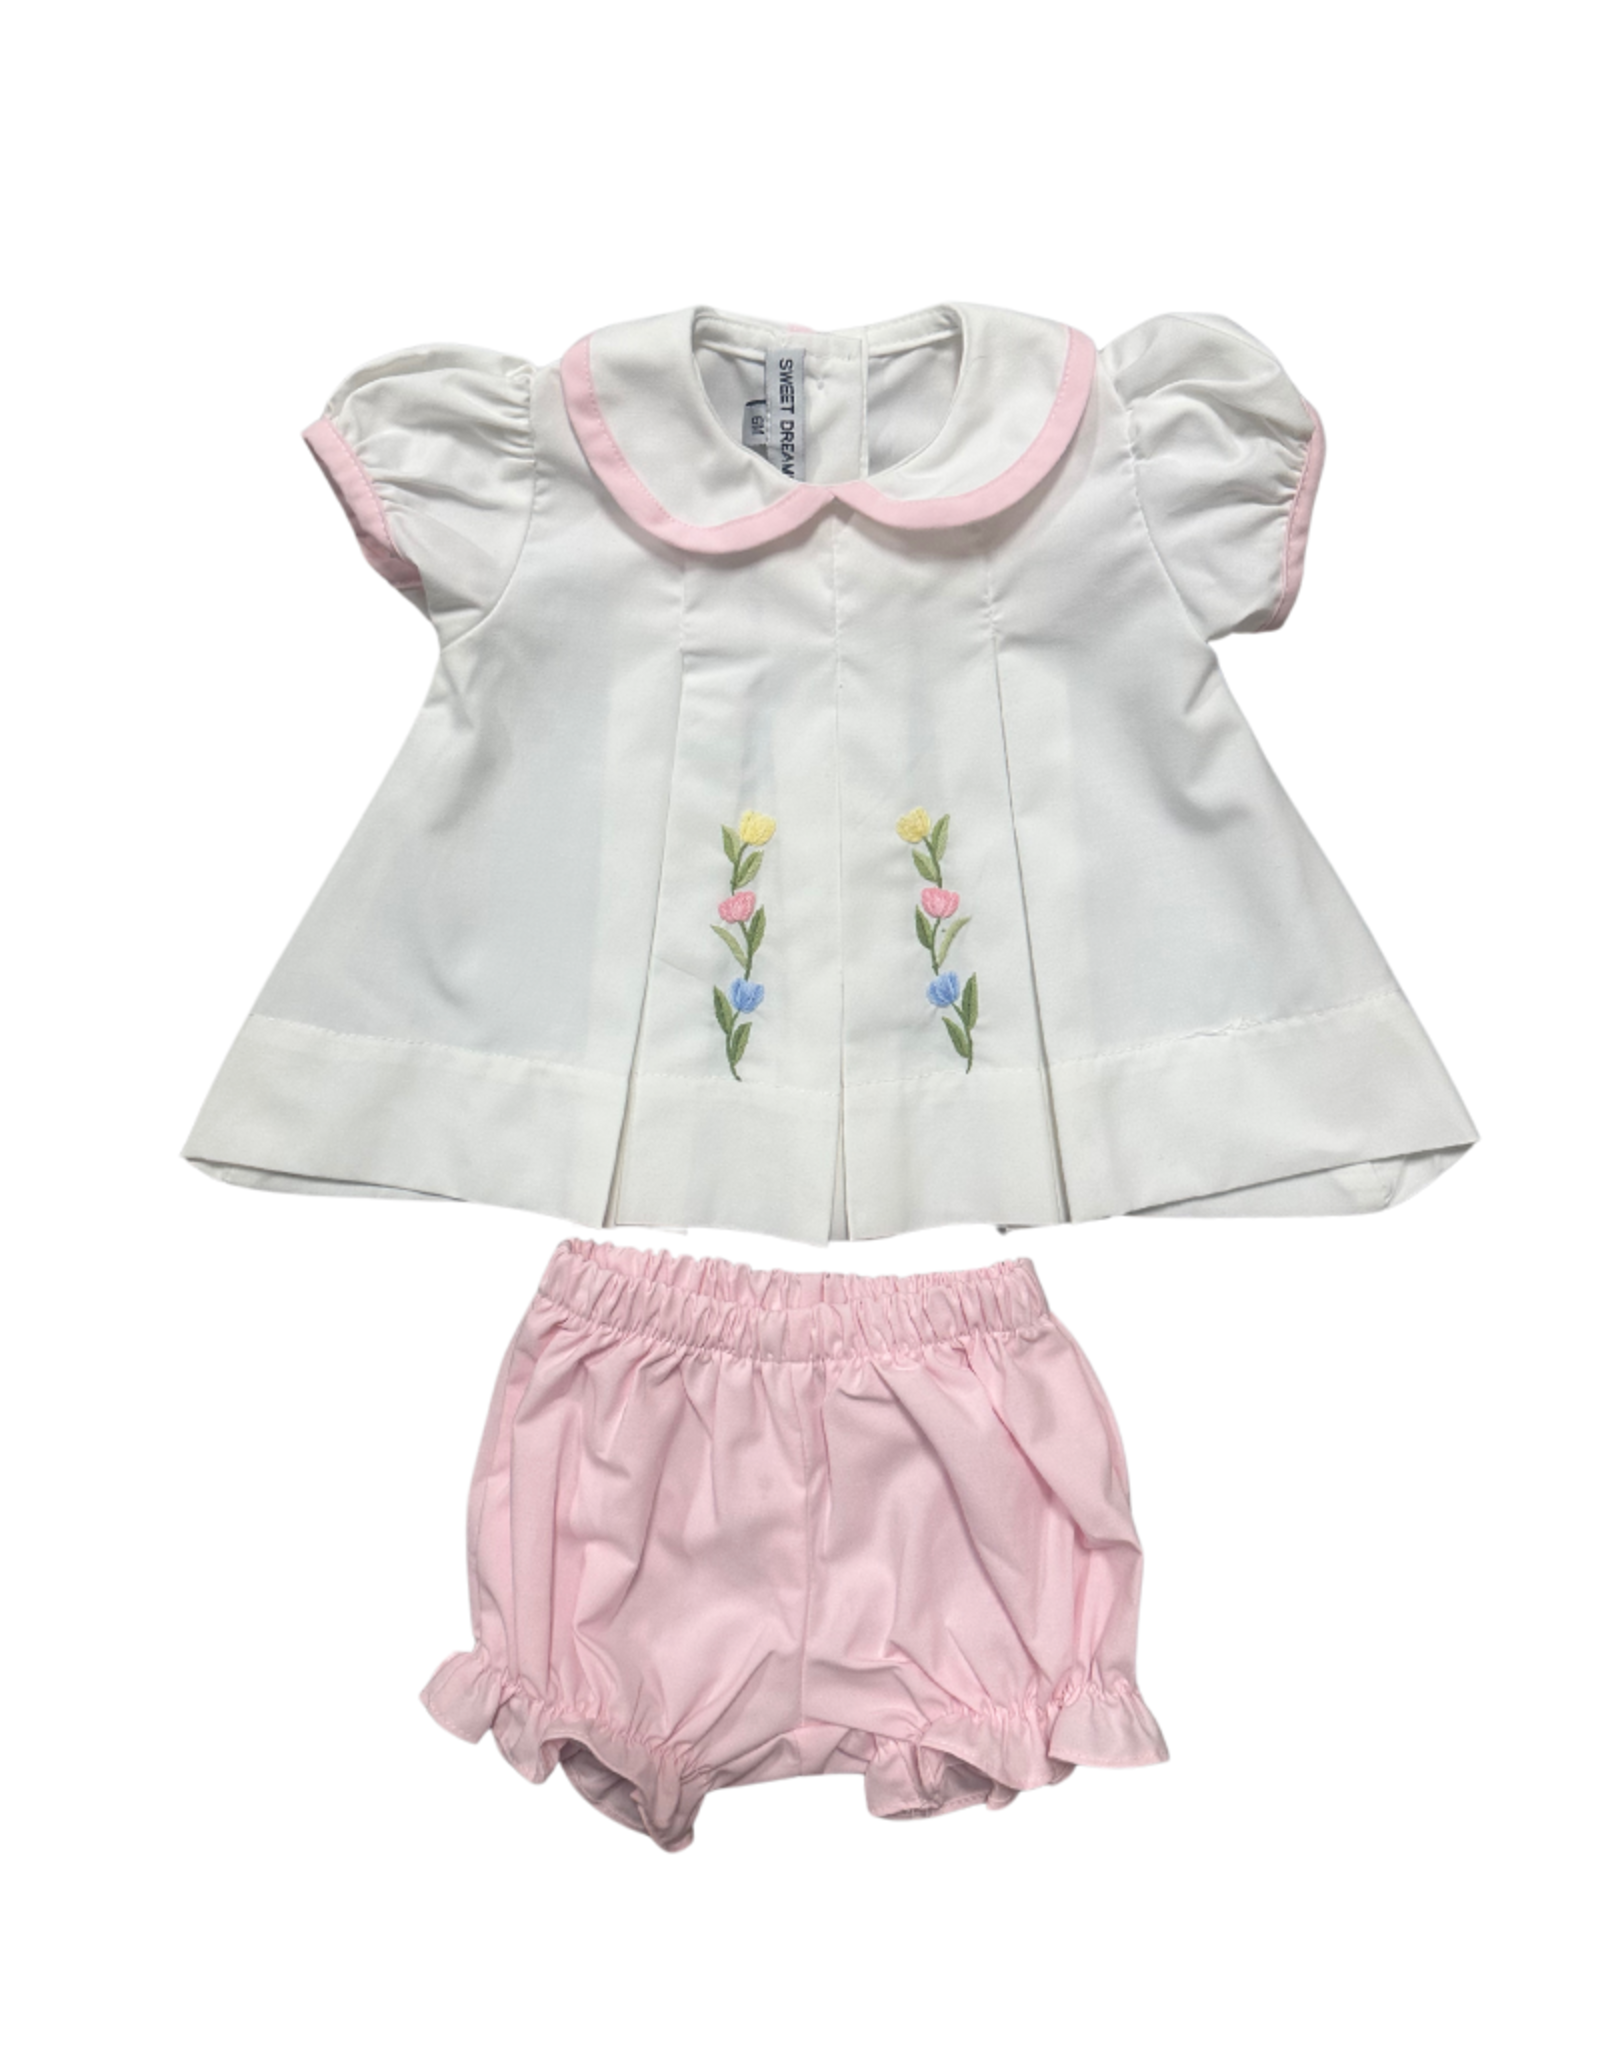 Sweet Dreams White/Pink Tulip Embroidered Outfit Set